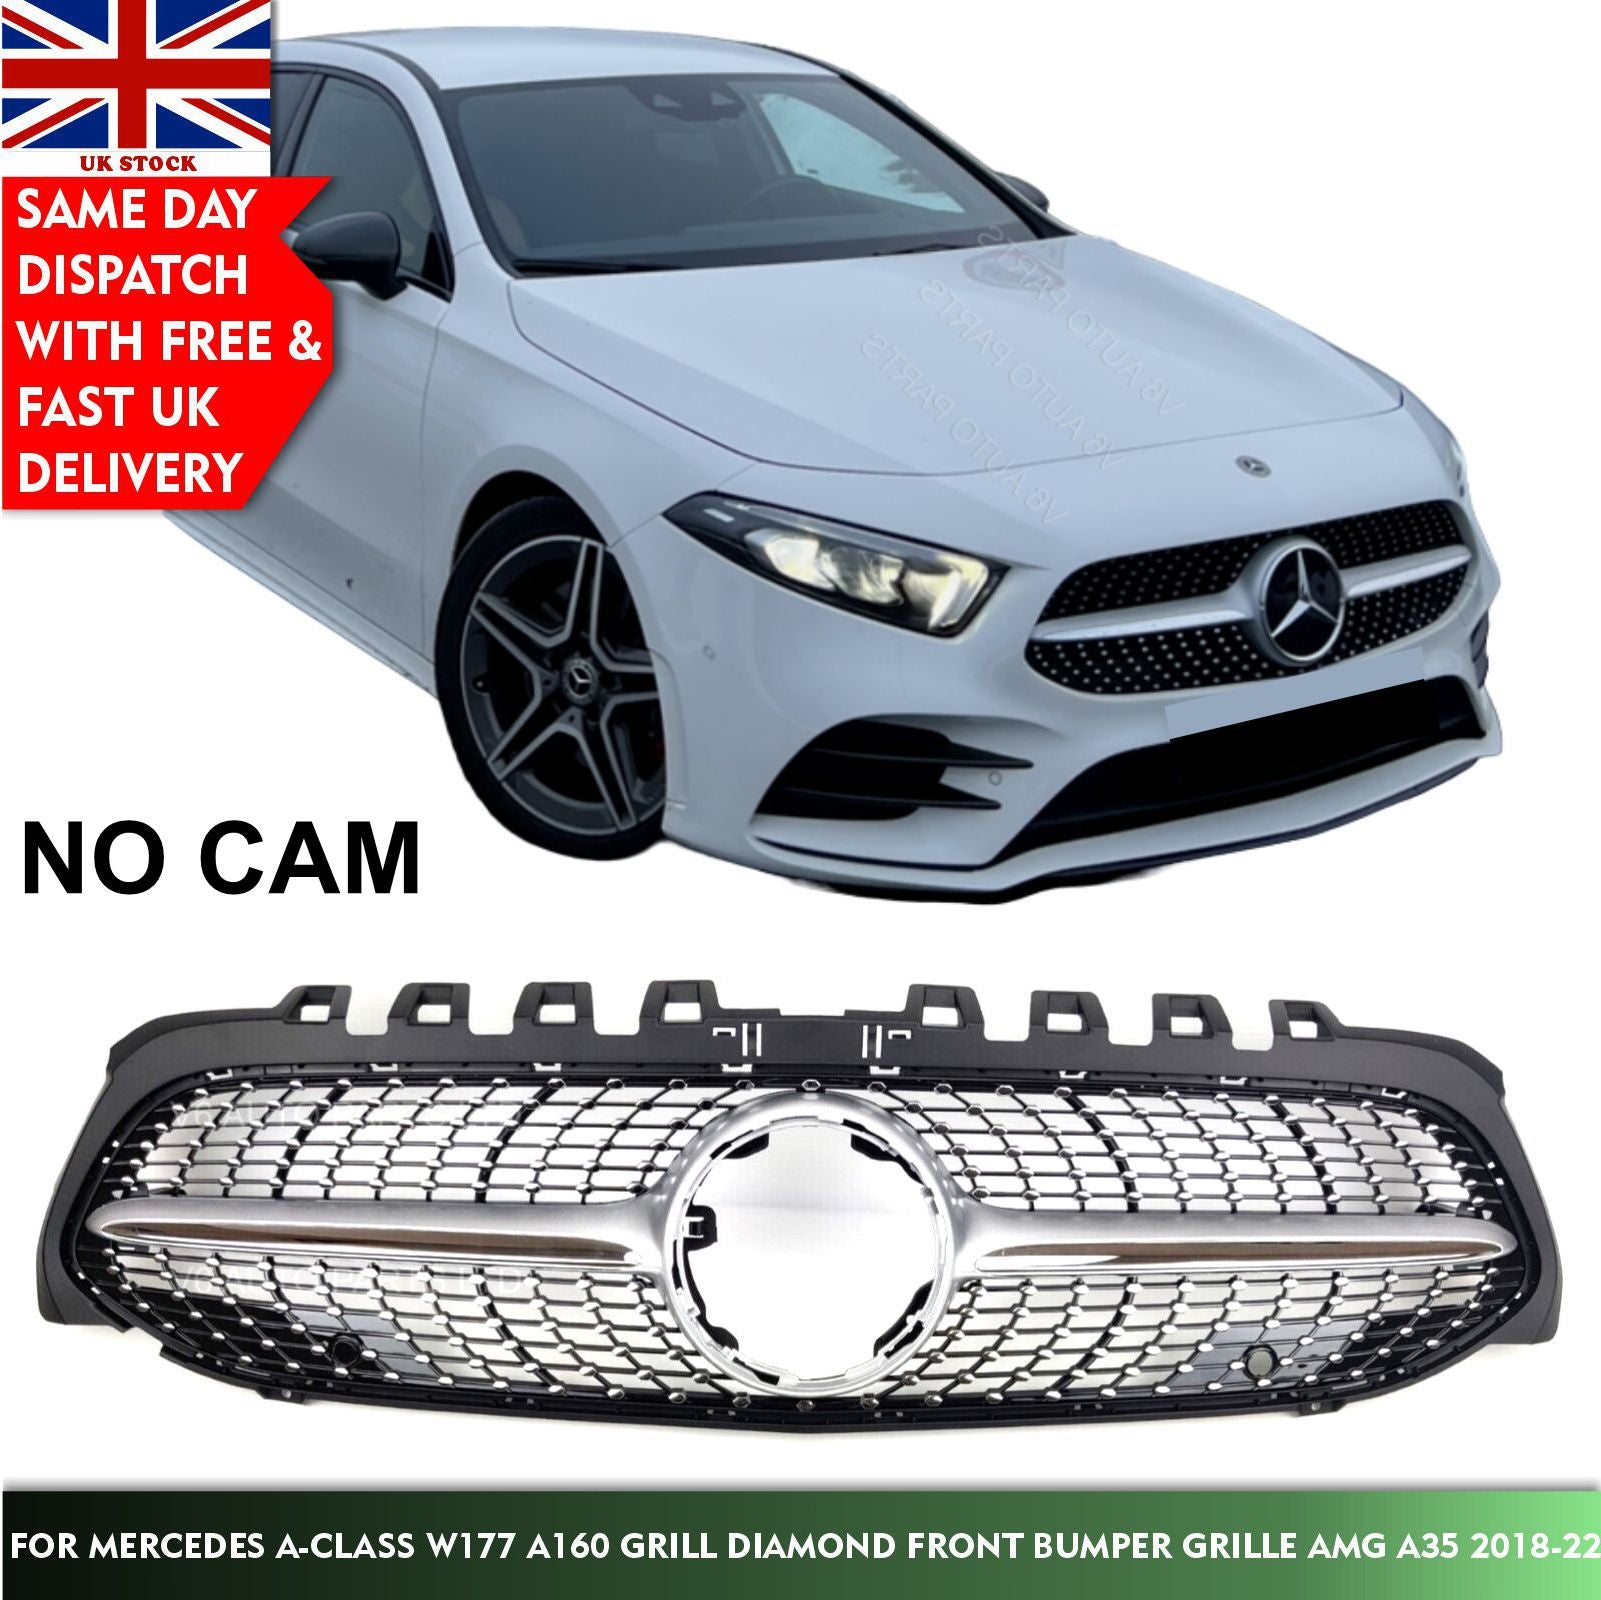 For Mercedes A-Class W177 A160 Grill Diamond Front Bumper Grille AMG A35 2018-22